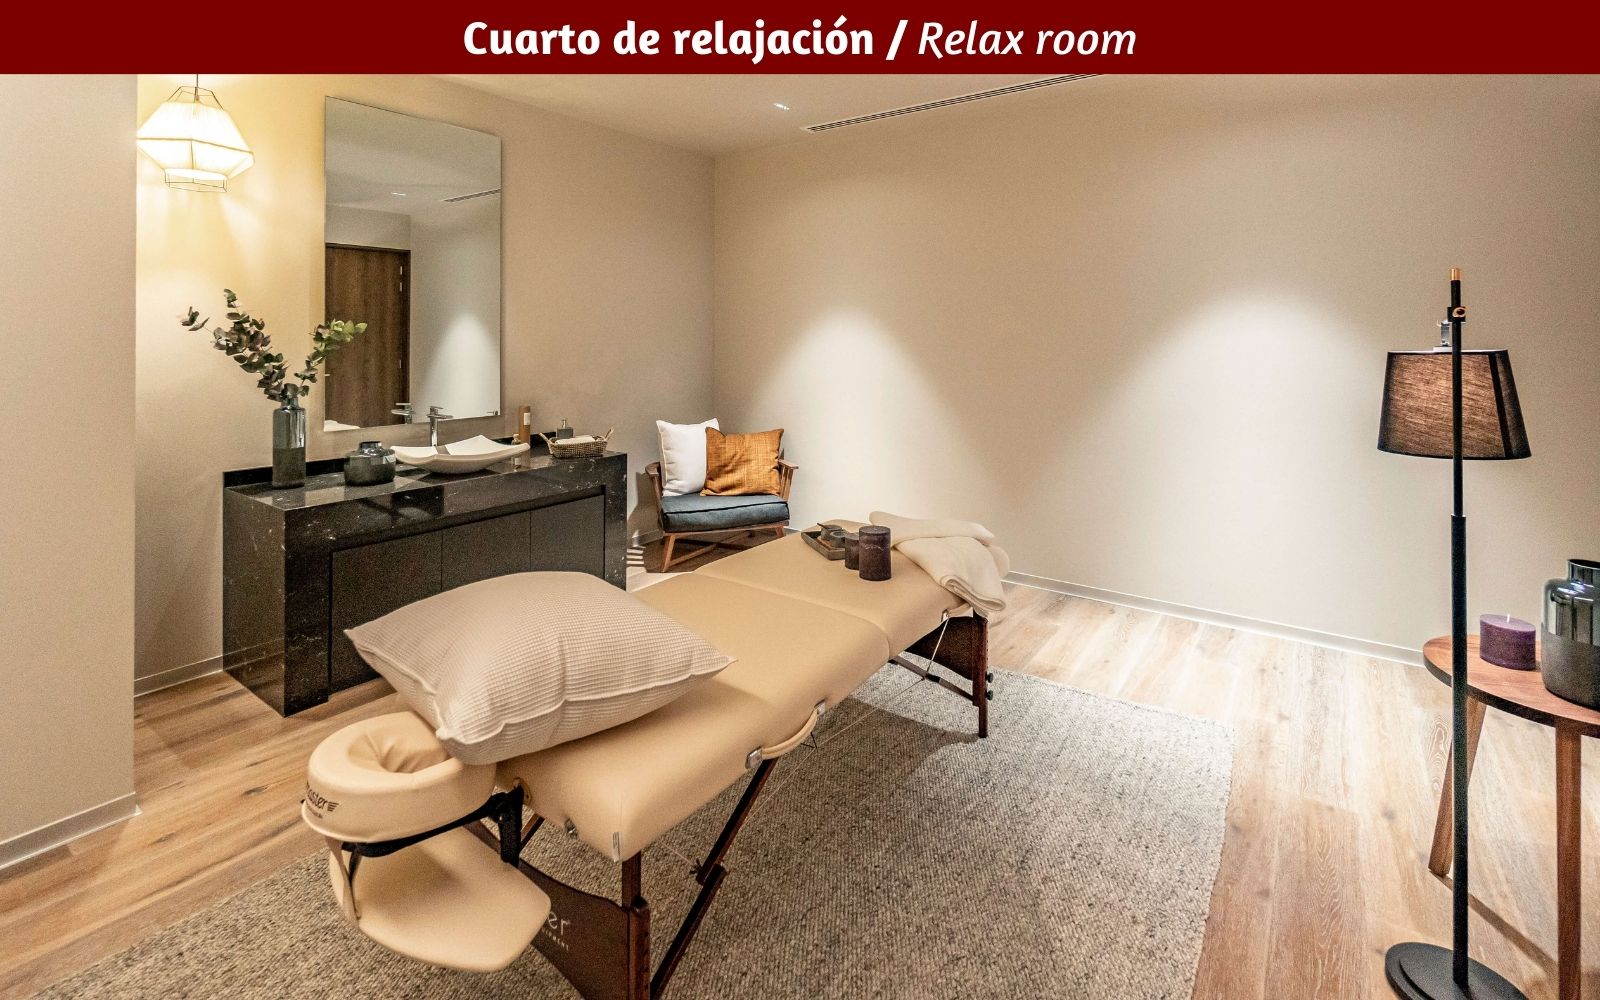 Condo with terrace, high ceilings, pool, pet friendly, spa for sale, Bosque Real